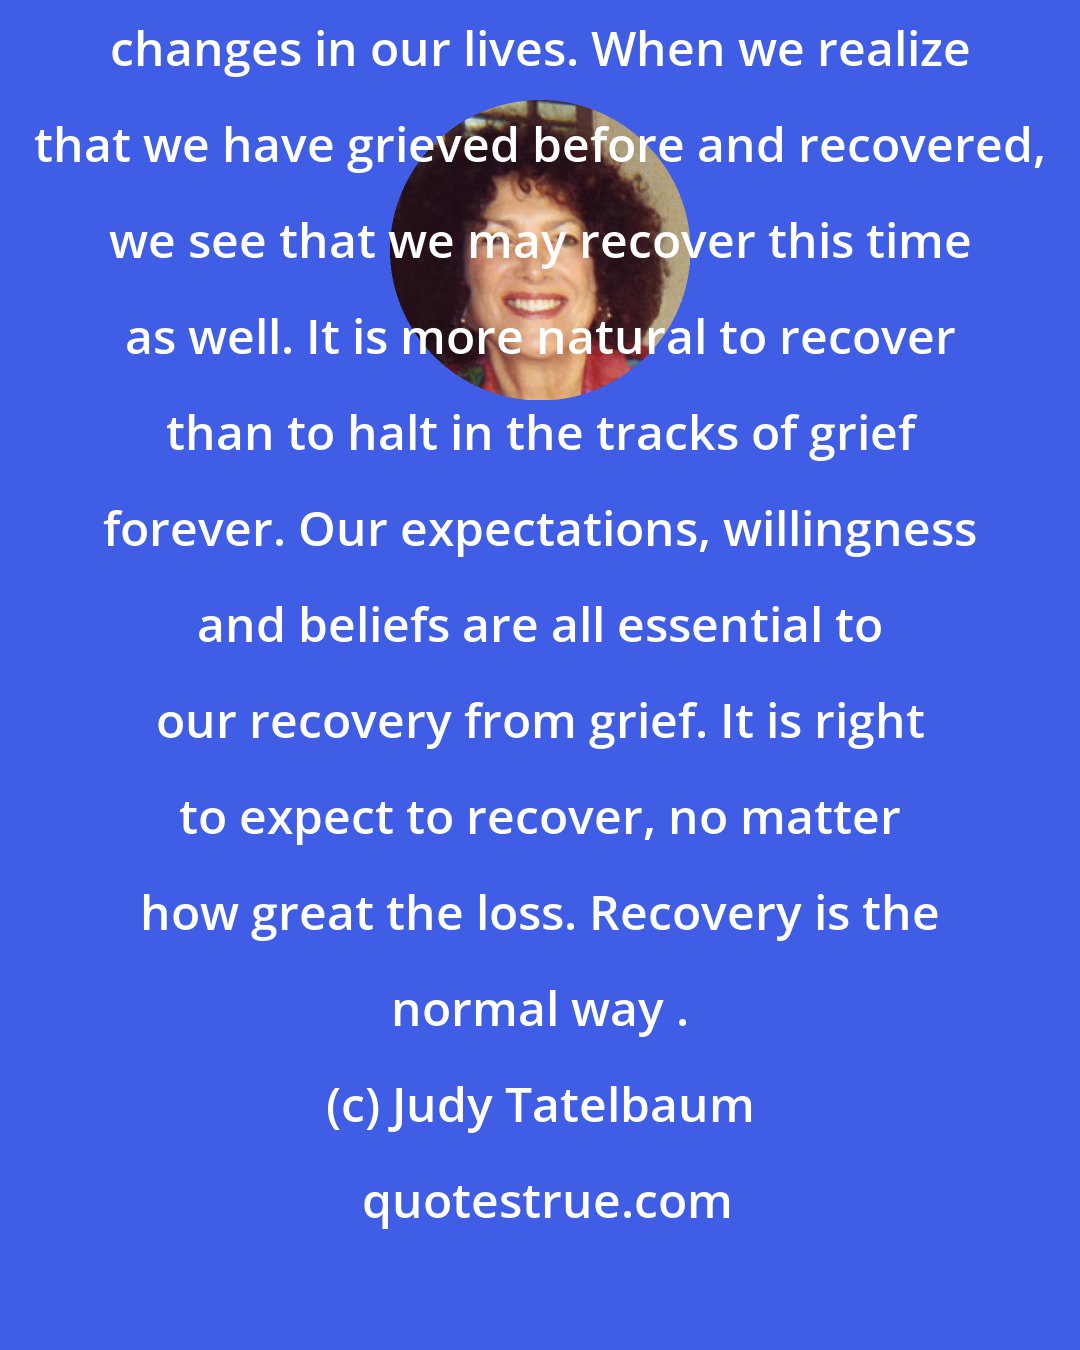 Judy Tatelbaum: Whether we experience it or not, grief accompanies all the major changes in our lives. When we realize that we have grieved before and recovered, we see that we may recover this time as well. It is more natural to recover than to halt in the tracks of grief forever. Our expectations, willingness and beliefs are all essential to our recovery from grief. It is right to expect to recover, no matter how great the loss. Recovery is the normal way .